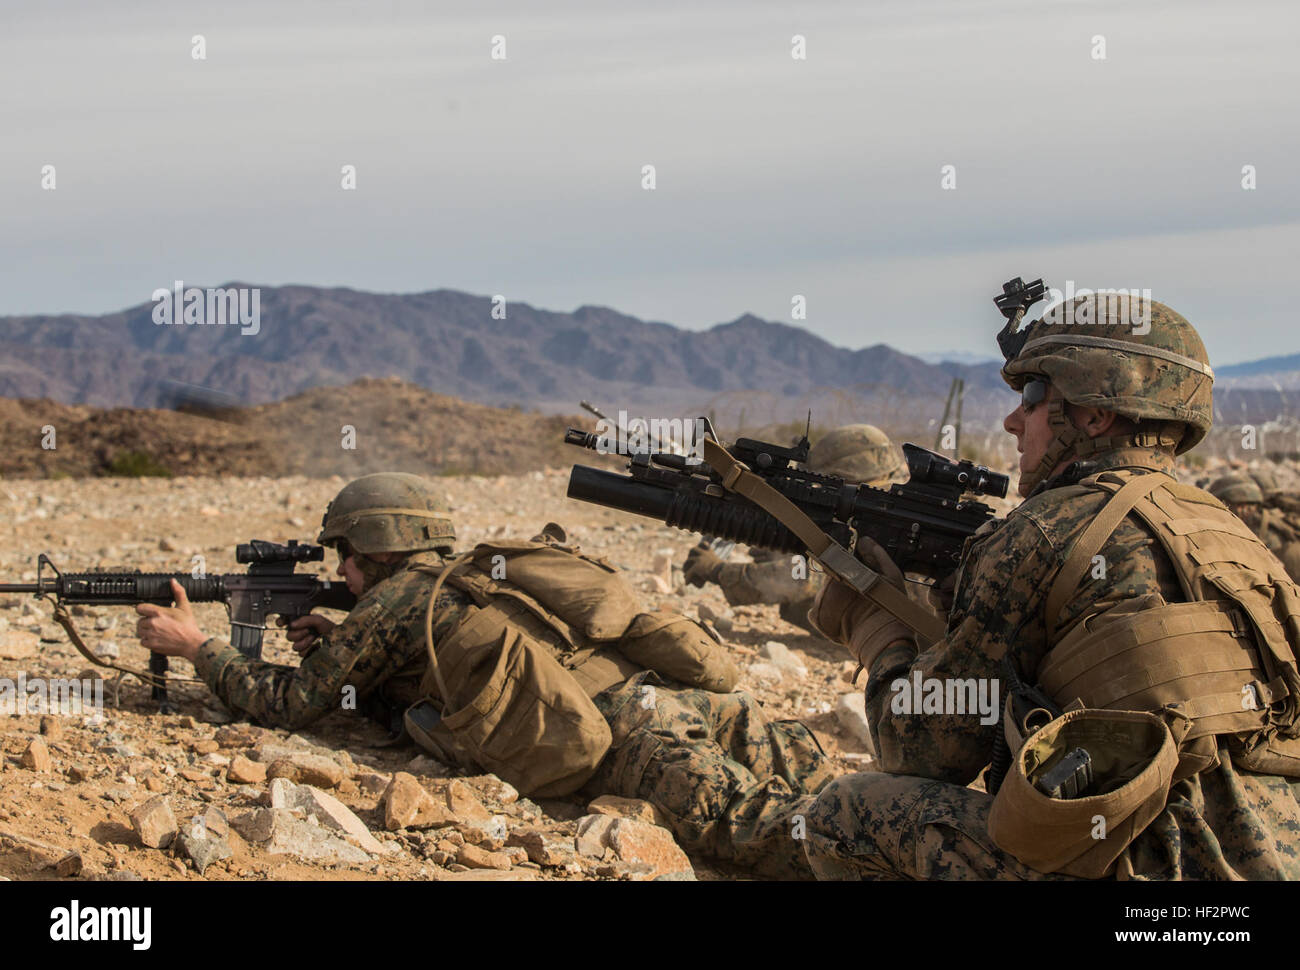 U.S. Marine Lance Cpl. Corey W. Dahmen, right, engages targets during a combined arms exercise aboard Marine Corps Air Ground Combat Center, Twentynine Palms, Calif., Dec. 15, 2014. Dahmen is a team leader with Battalion Landing Team 3rd Battalion, 1st Marine Regiment, 15th Marine Expeditionary Unit. BLT 3/1 conducted this training concurrent with the 15th MEU’s realistic urban training.  RUT prepares the 15th MEU’s Marines for their upcoming deployment, enhancing their combat skills in environments similar to those they may find in future missions. (U.S. Marine Corps Photo by Sgt. Emmanuel Ra Stock Photo